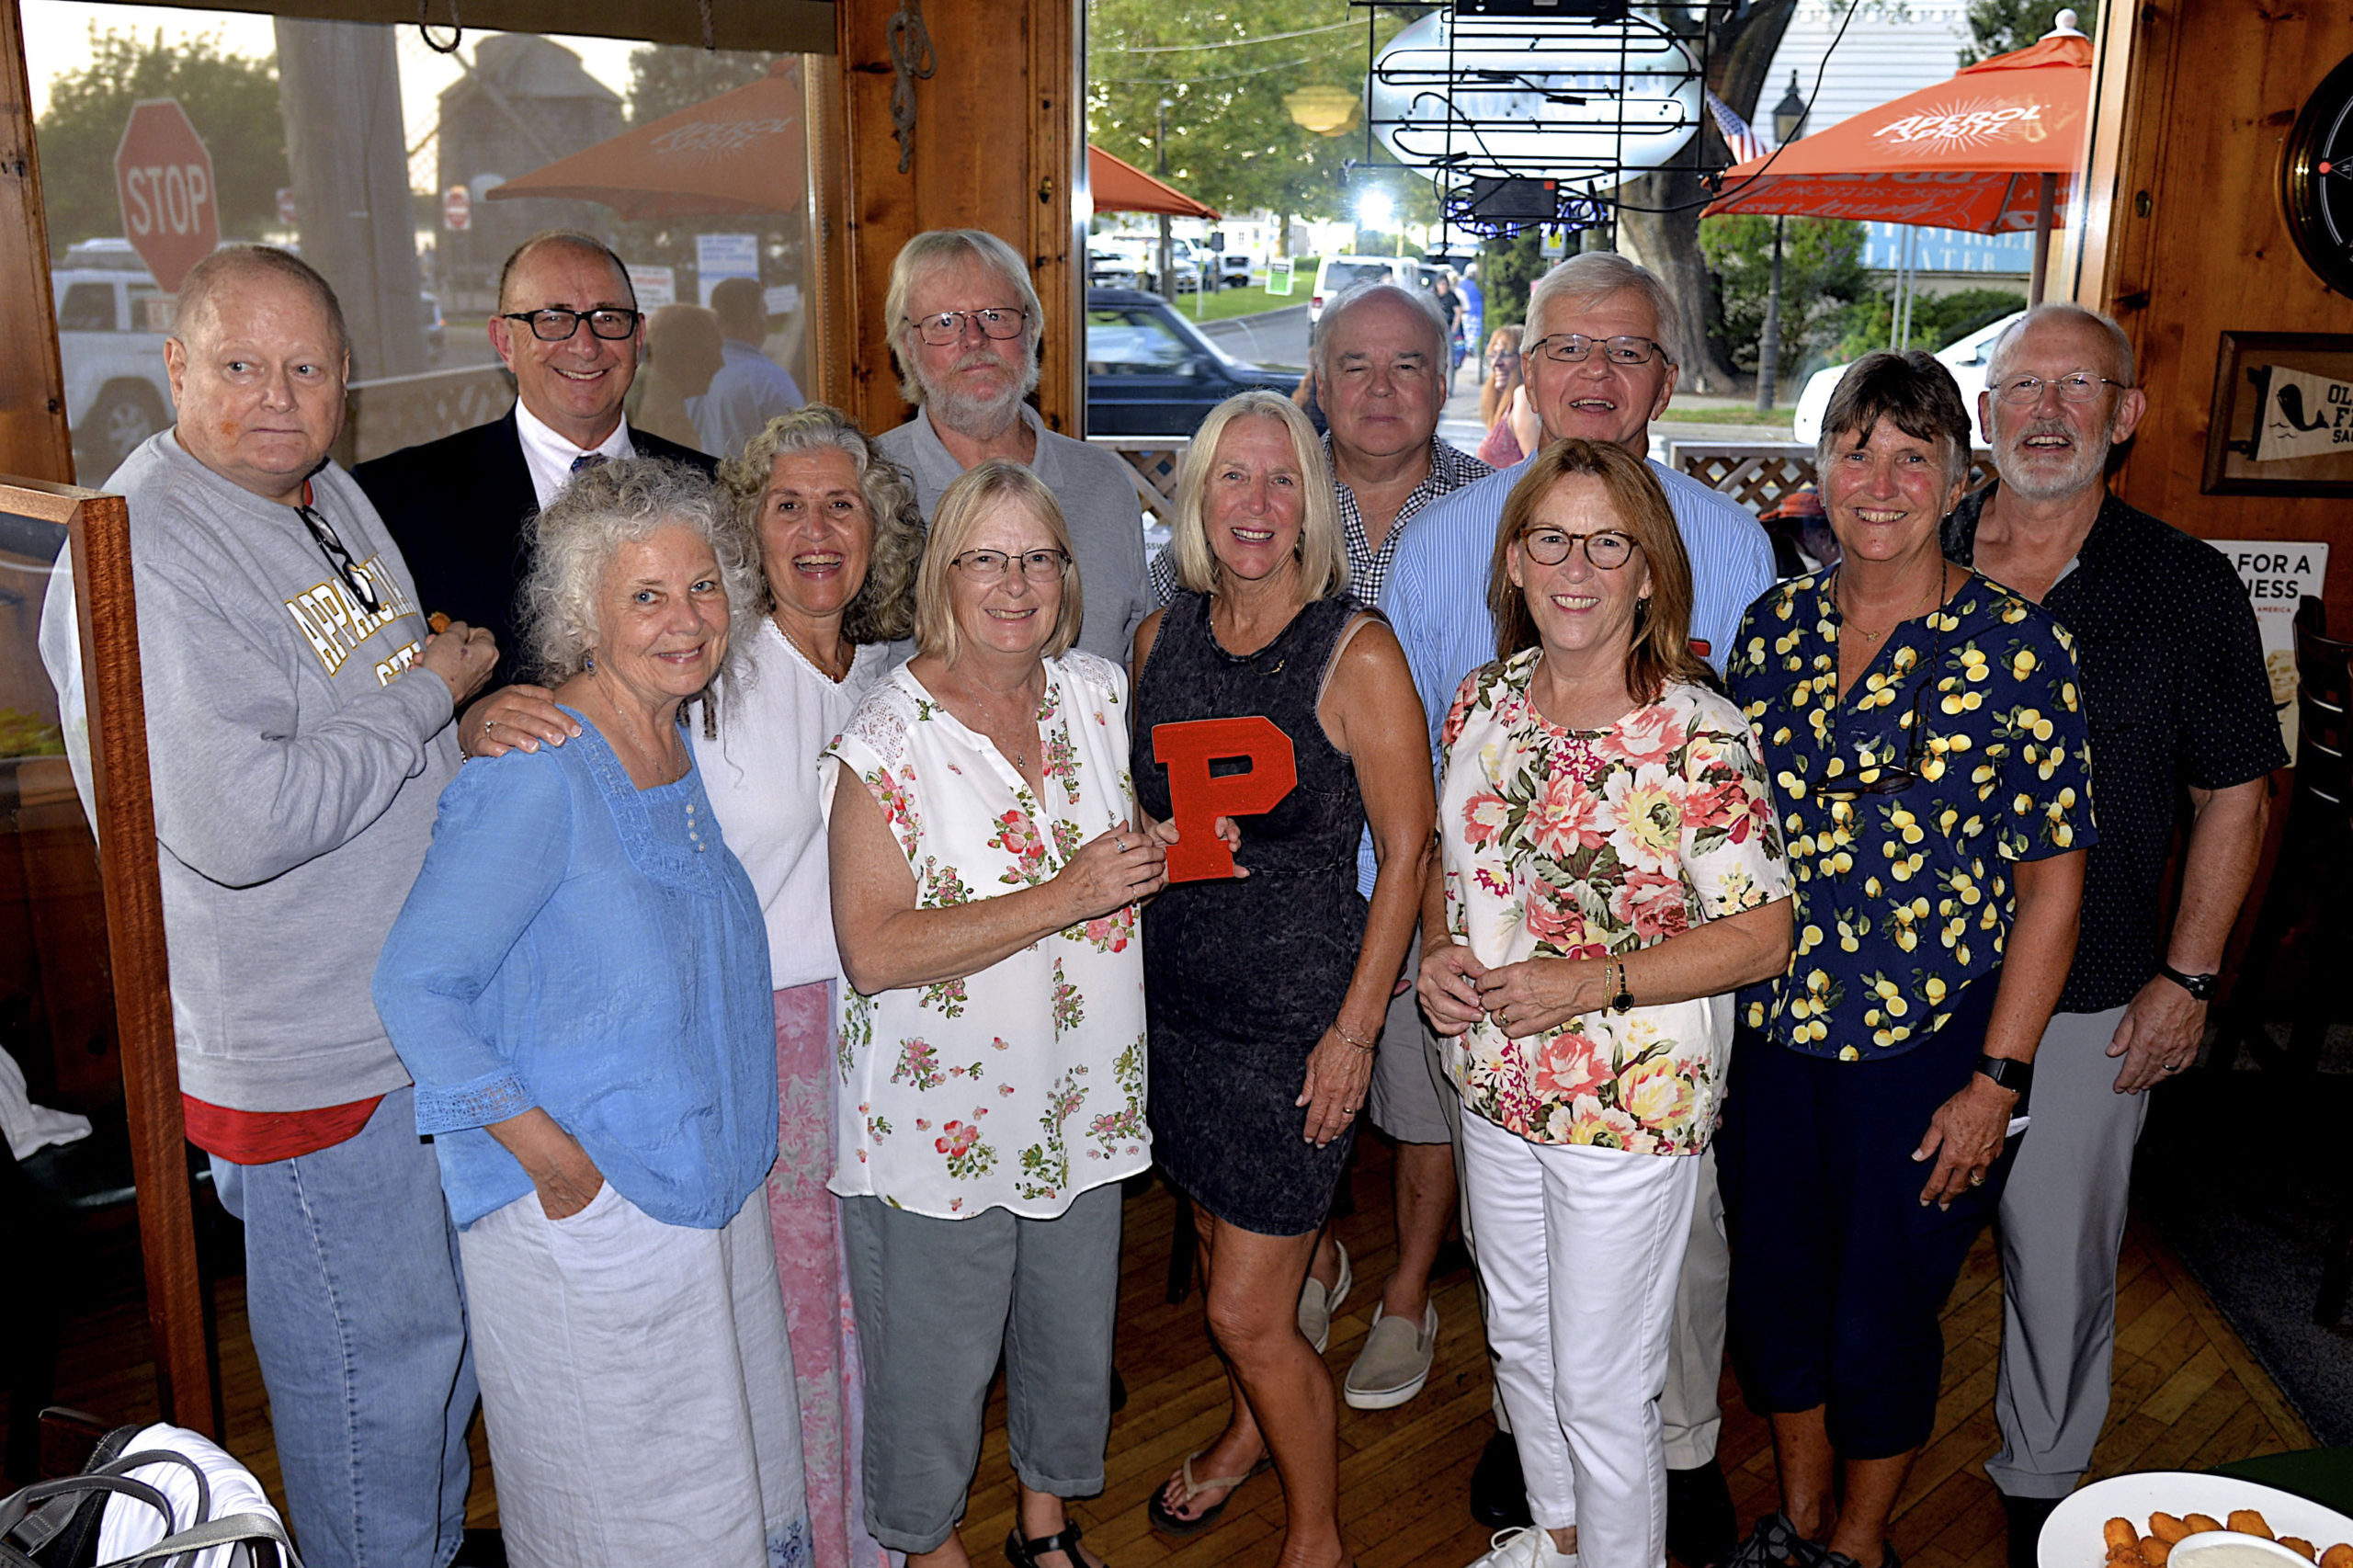 Some of the members of the Pierson Class of 1971, Michael Remkus, Steve Haerter, Marion Allen, Cathy Santacroce-Worwetz, Harold Worwetz, Colleen Stafford, Beth O’Sullivan, Tim Mott, Fred Thiele, Vee Bennett, Bethany Deyermond and Mark Weiderst, met at the Corner Bar in Sag harbor on Saturday evening to celebrate their 50th reunion.    KYRIL BROMLEY